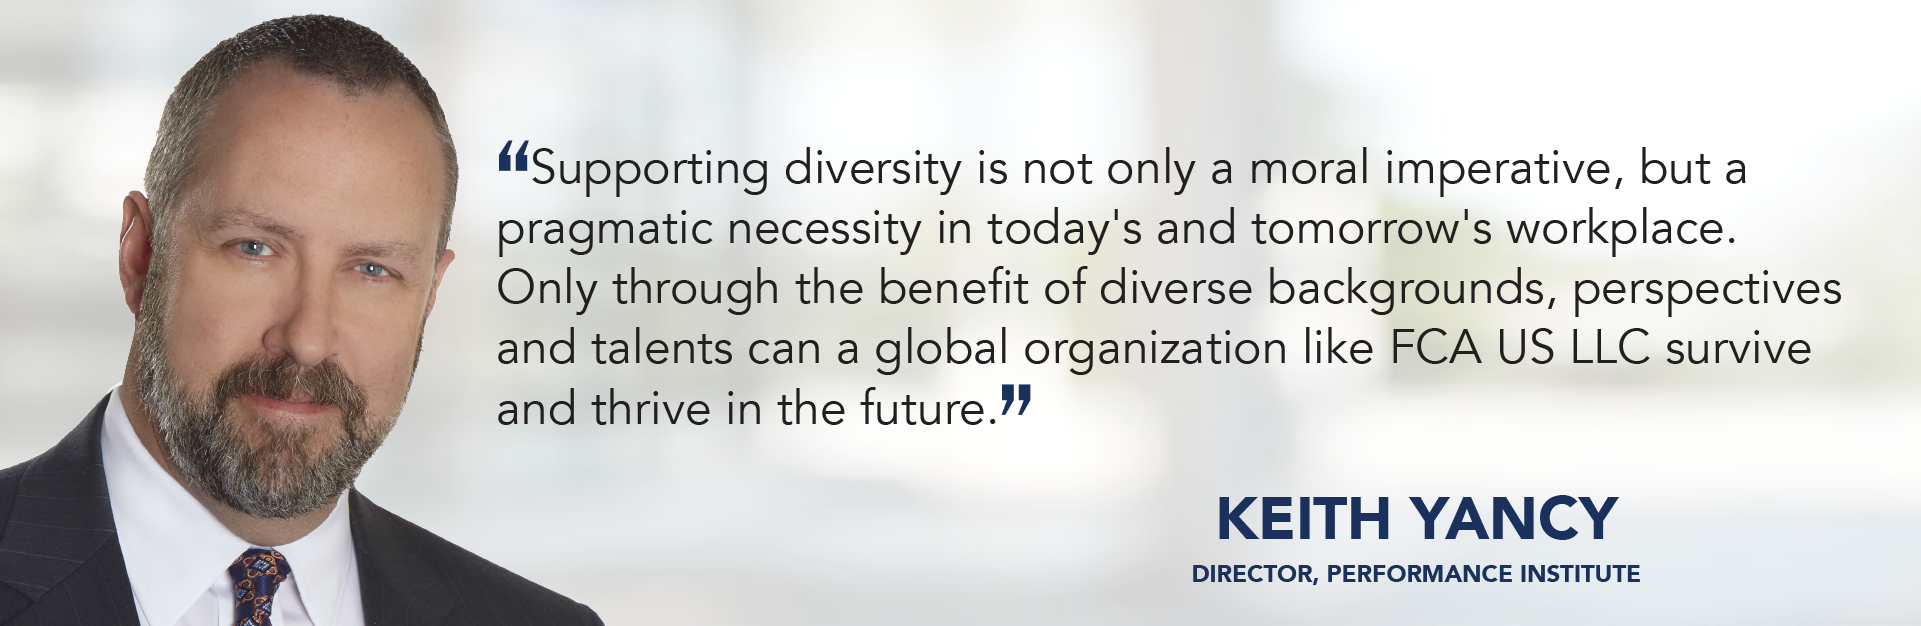 Supporting diversity is not only a moral imperative, but a pragmatic necessity in today's and tomorrow's workplace. Only through the benefit of diverse backgrounds, perspectives and talents can a global organization like FCA US LLC survive and thrive in the future. - Keith Yancy